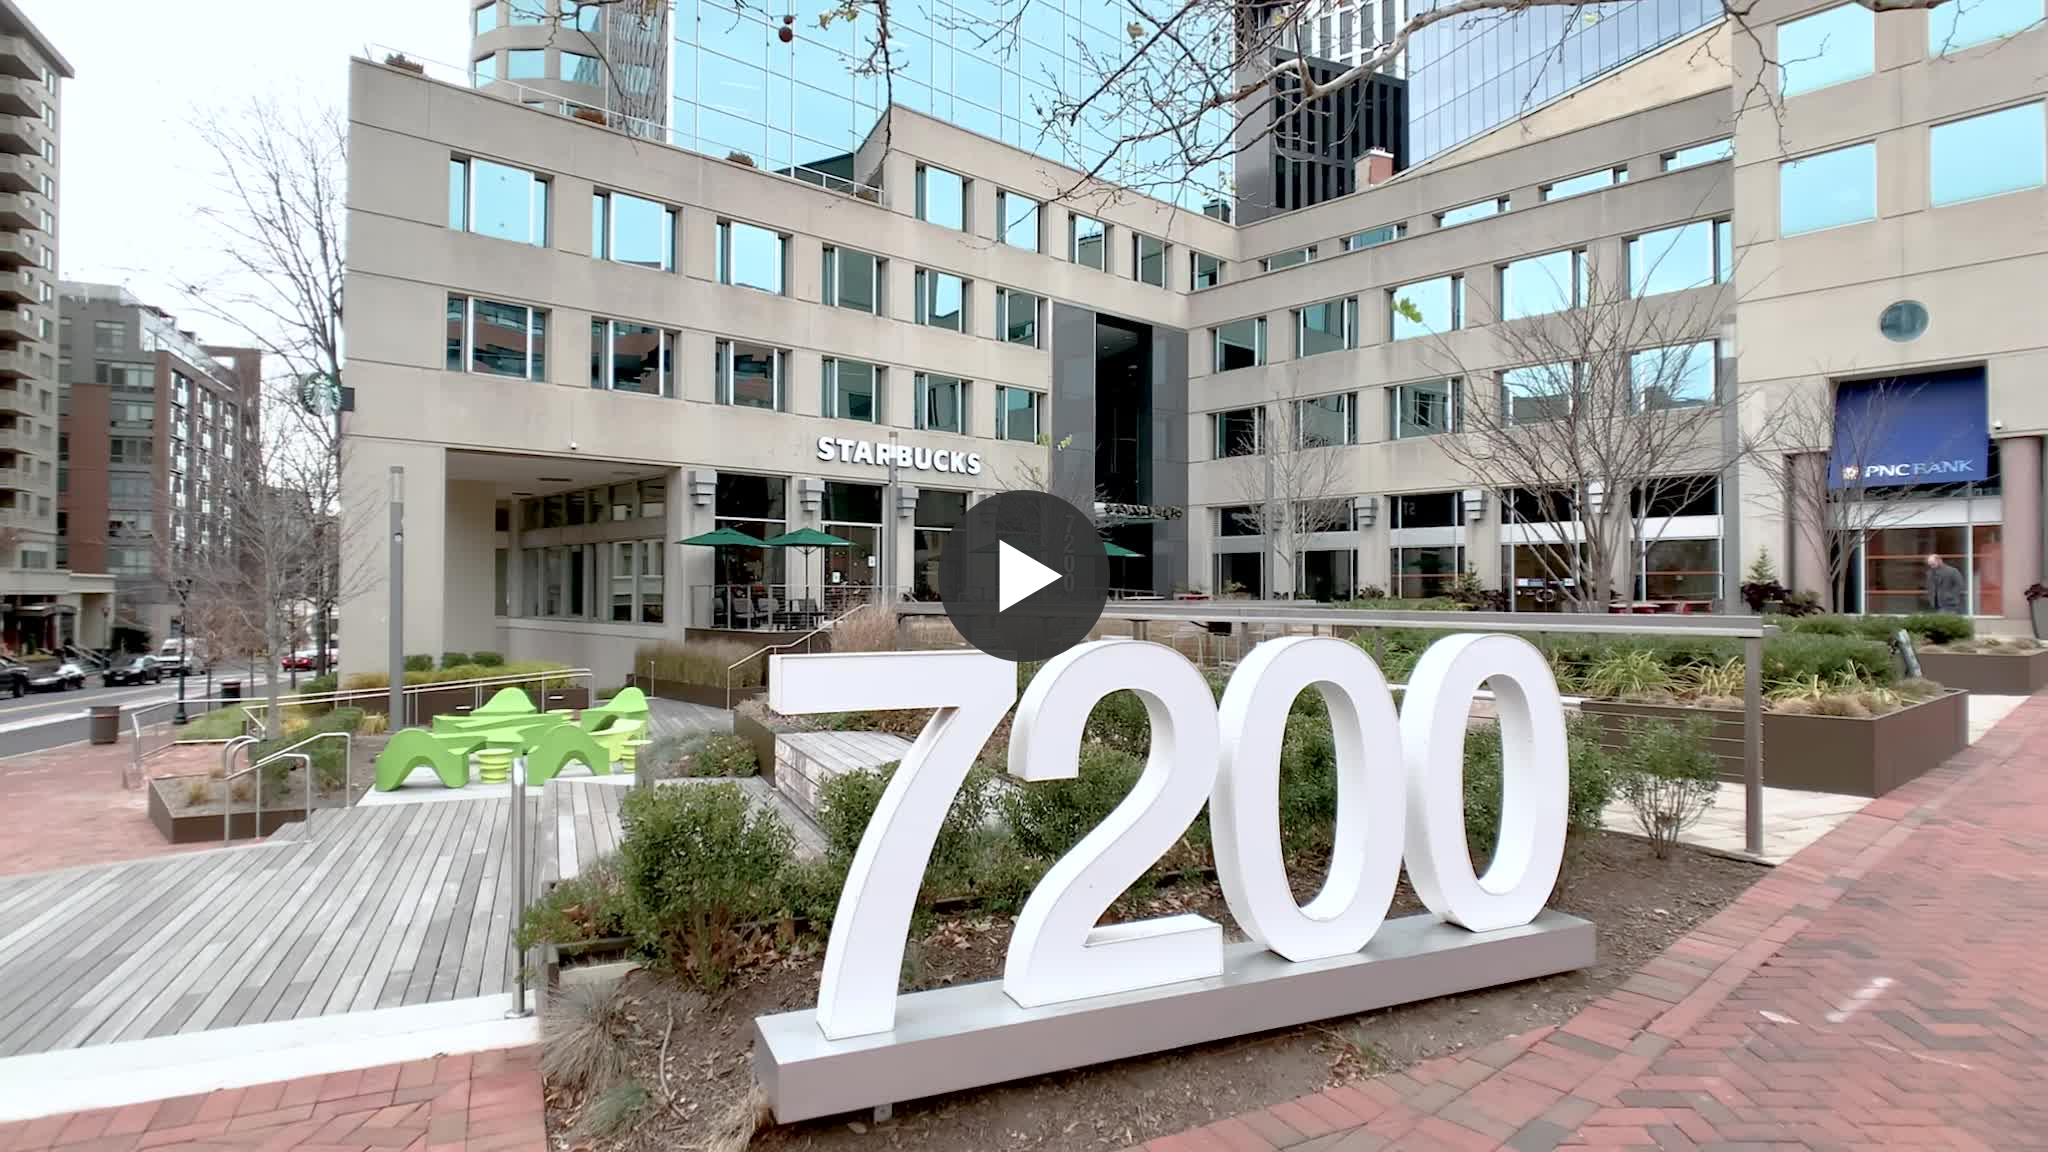 7200 Wisconsin Ave, Bethesda, MD 20814 - Industrious Bethesda